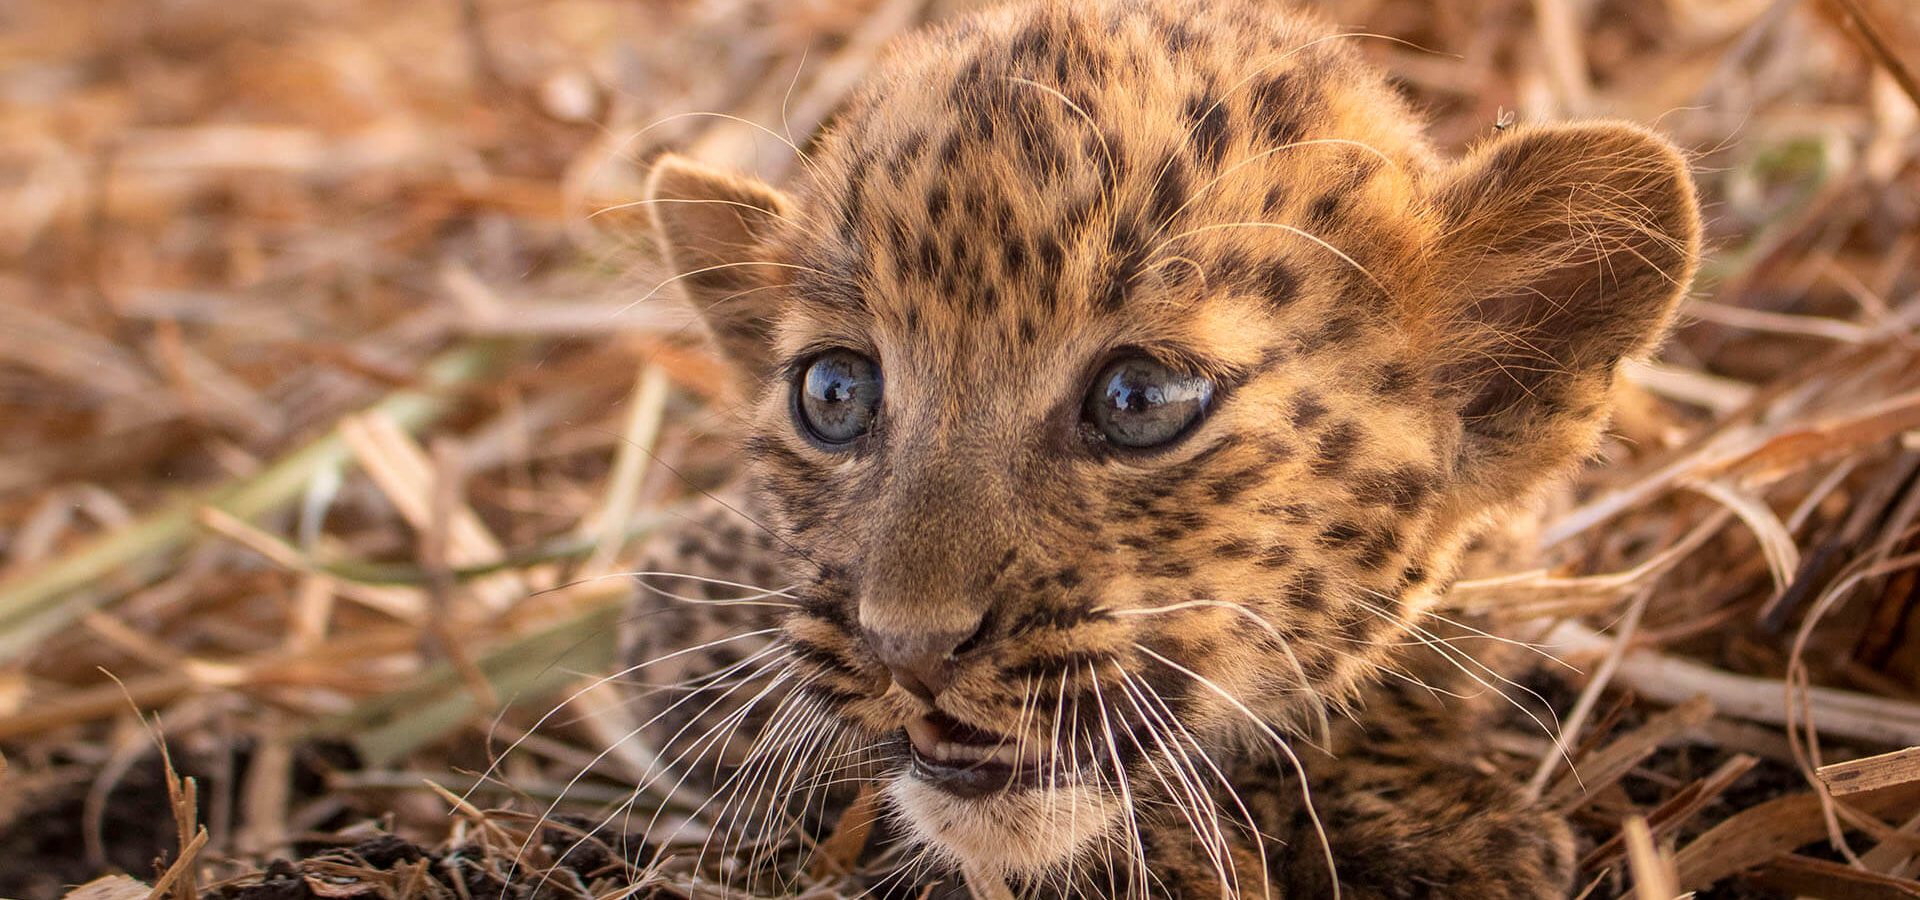 Leopards: How India can learn to live with them